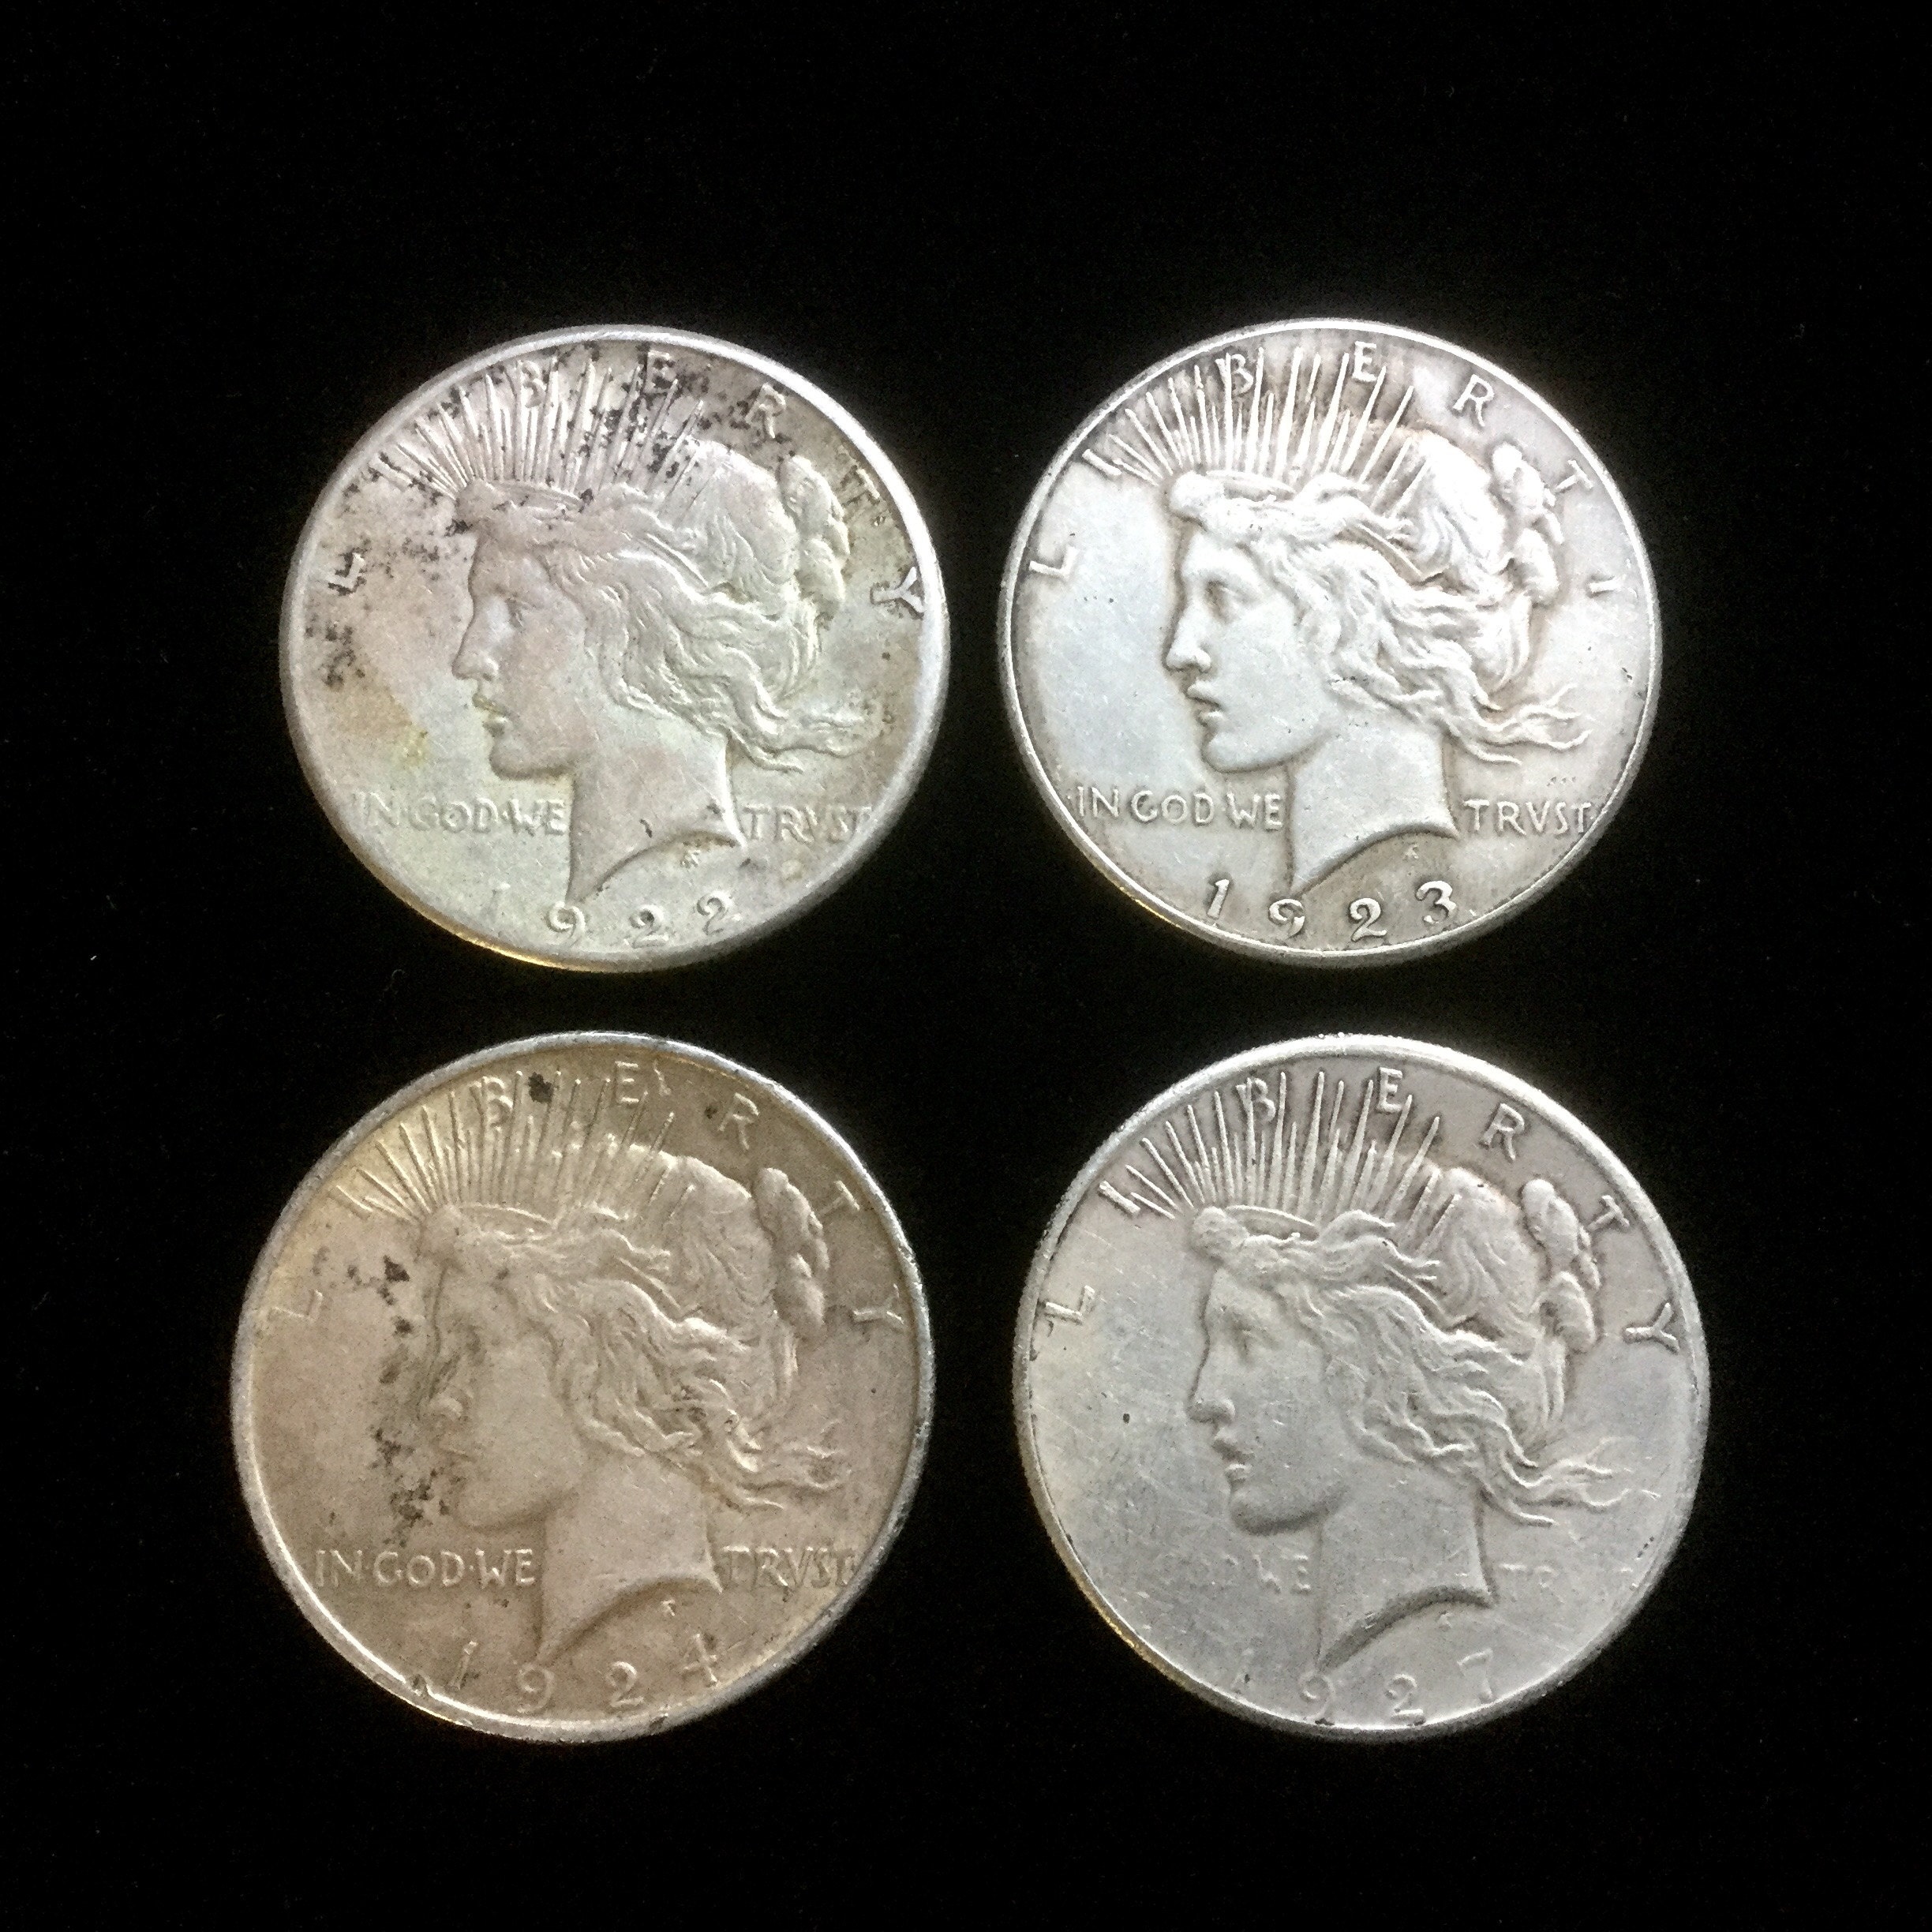 Are your silver dollars real or fake?